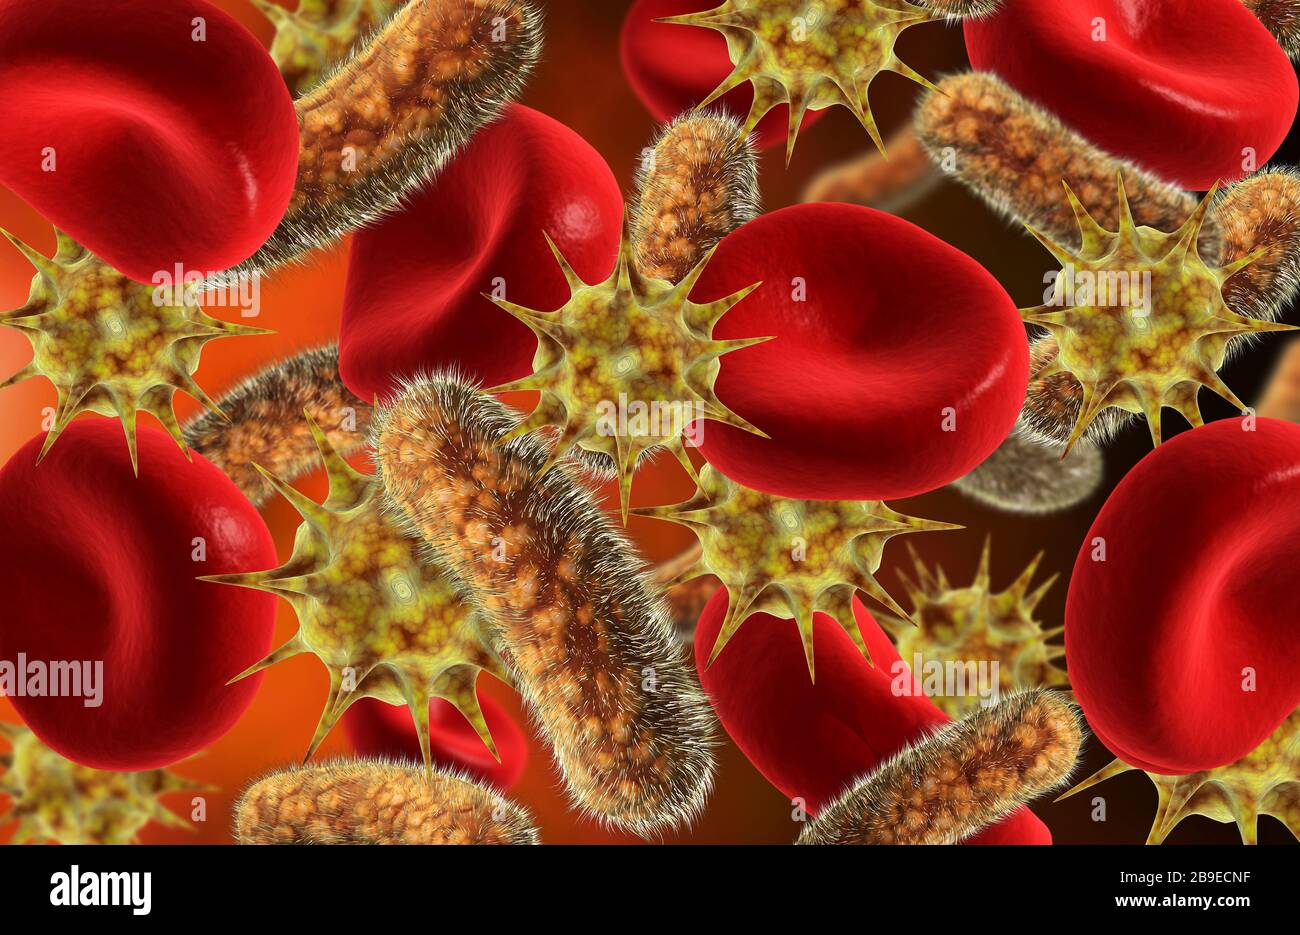 Conceptual image of bacteria and virus with blood cells. Stock Photo